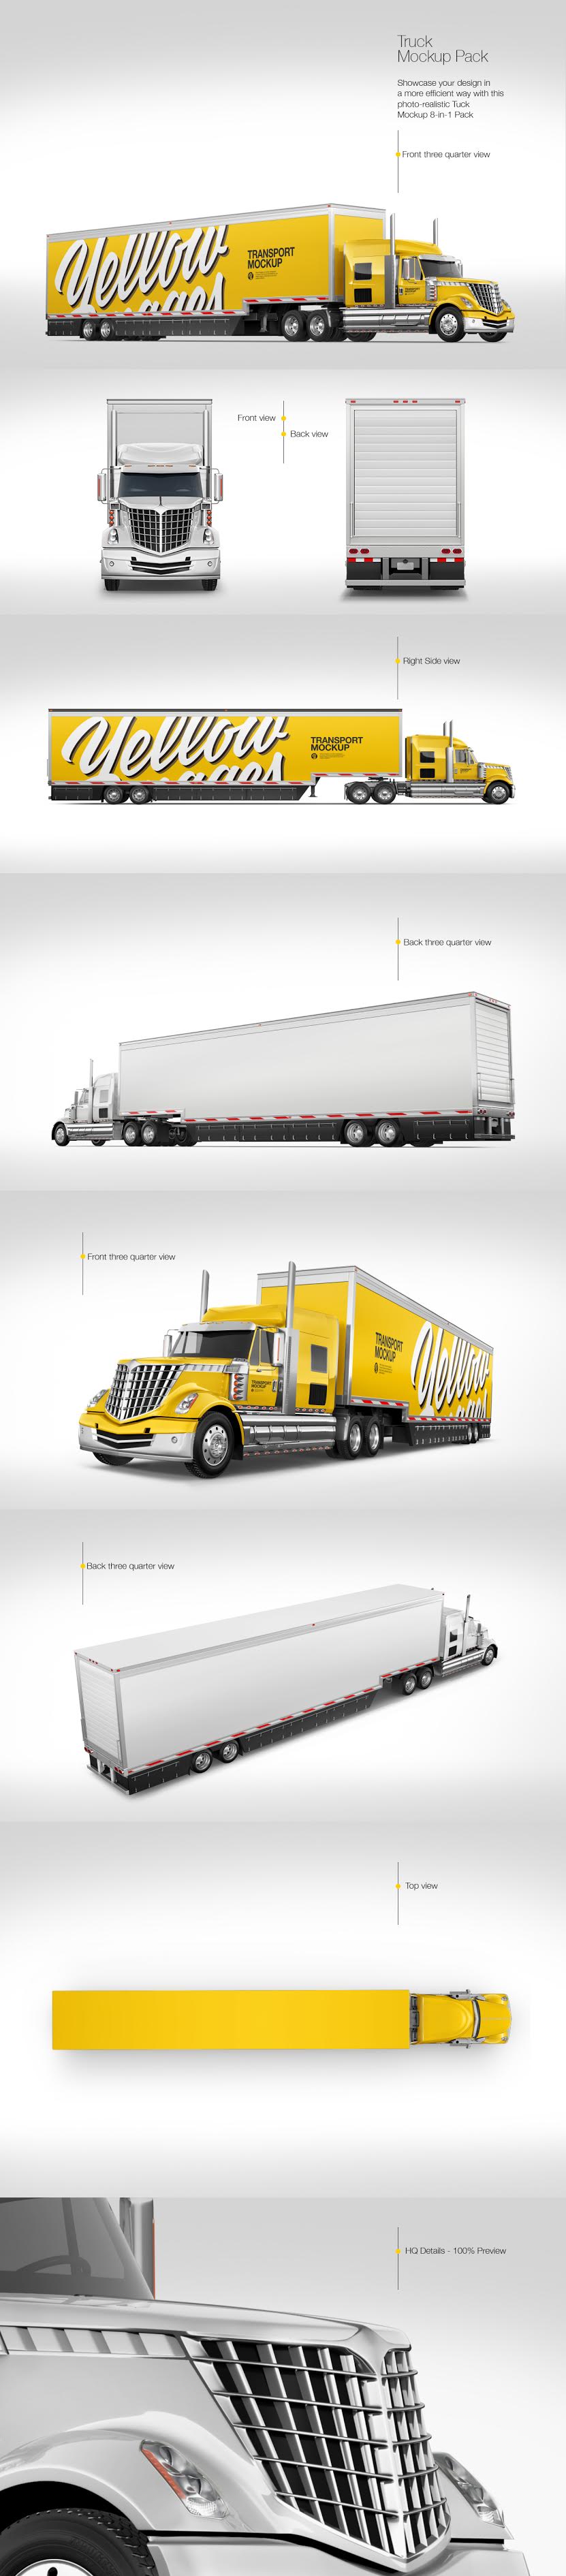 Truck Mockup Pack - Download Truck Mockup Pack, Showcase your design in a more efficient way ...